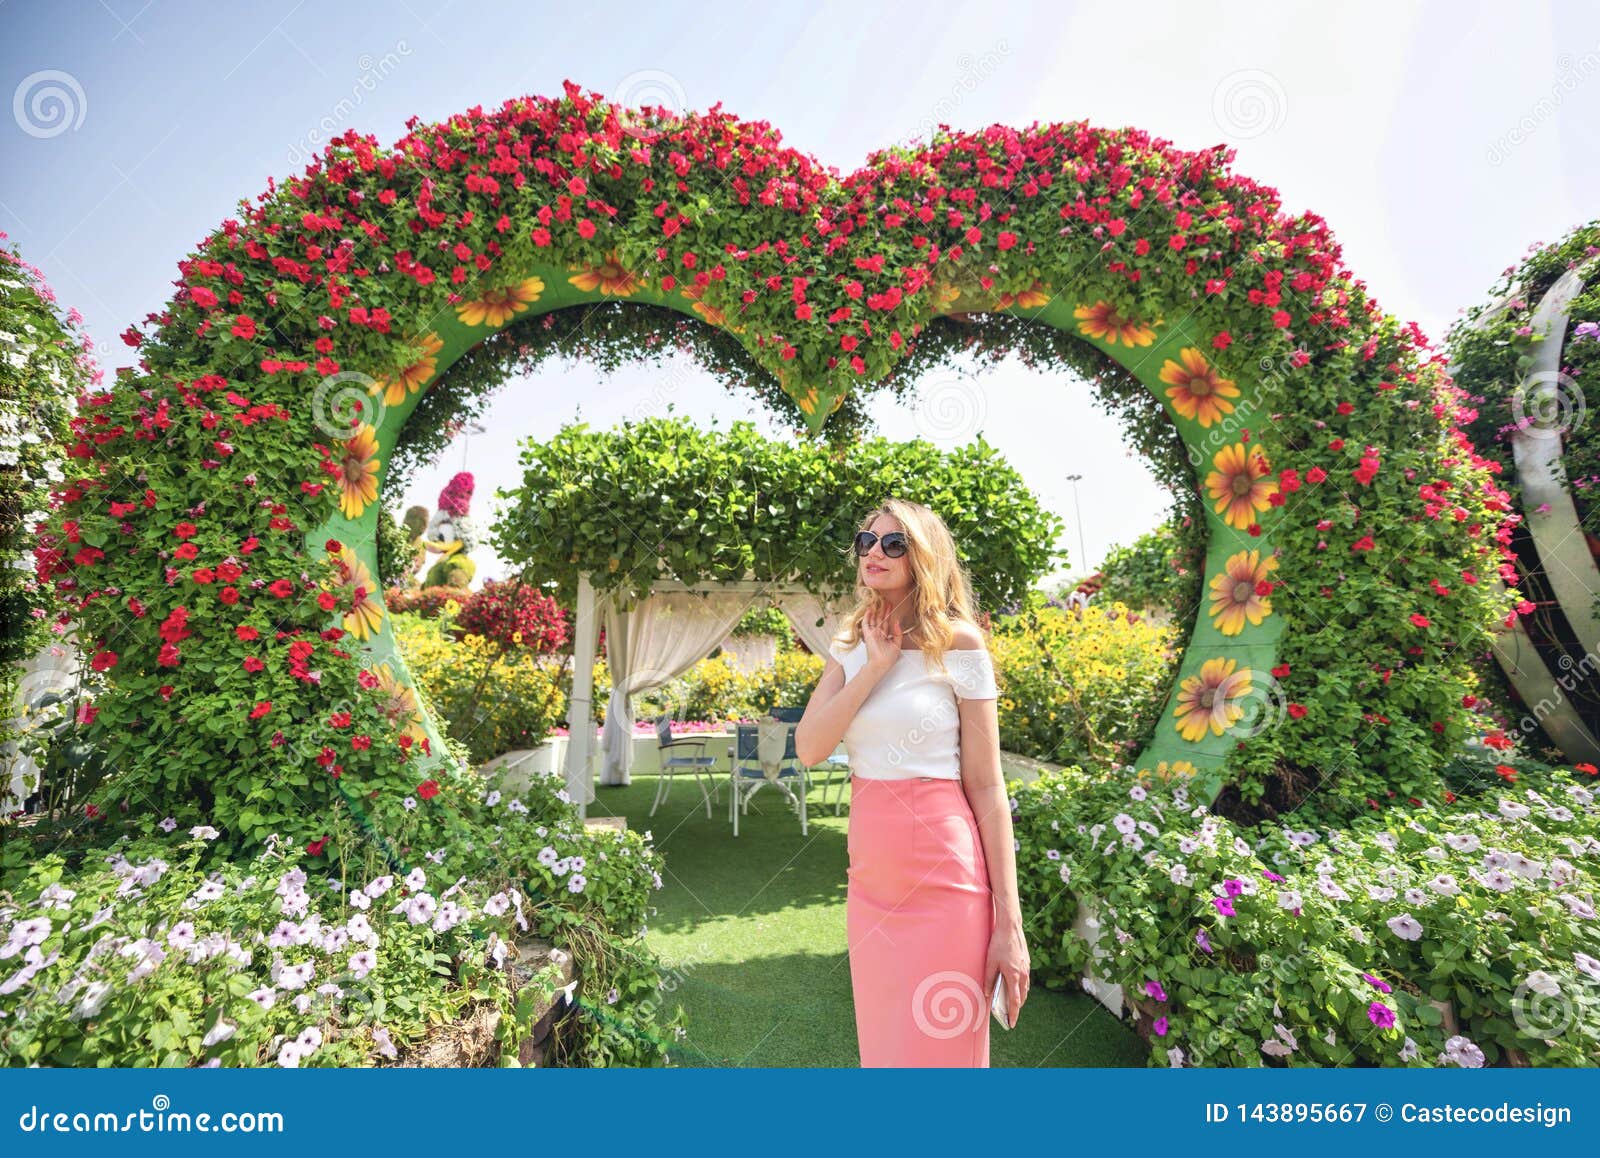 Woman in Dubai Garden Portrait. Sunny Day Beautiful Flowers Backgrounds  Stock Image - Image of blossom, green: 143895667